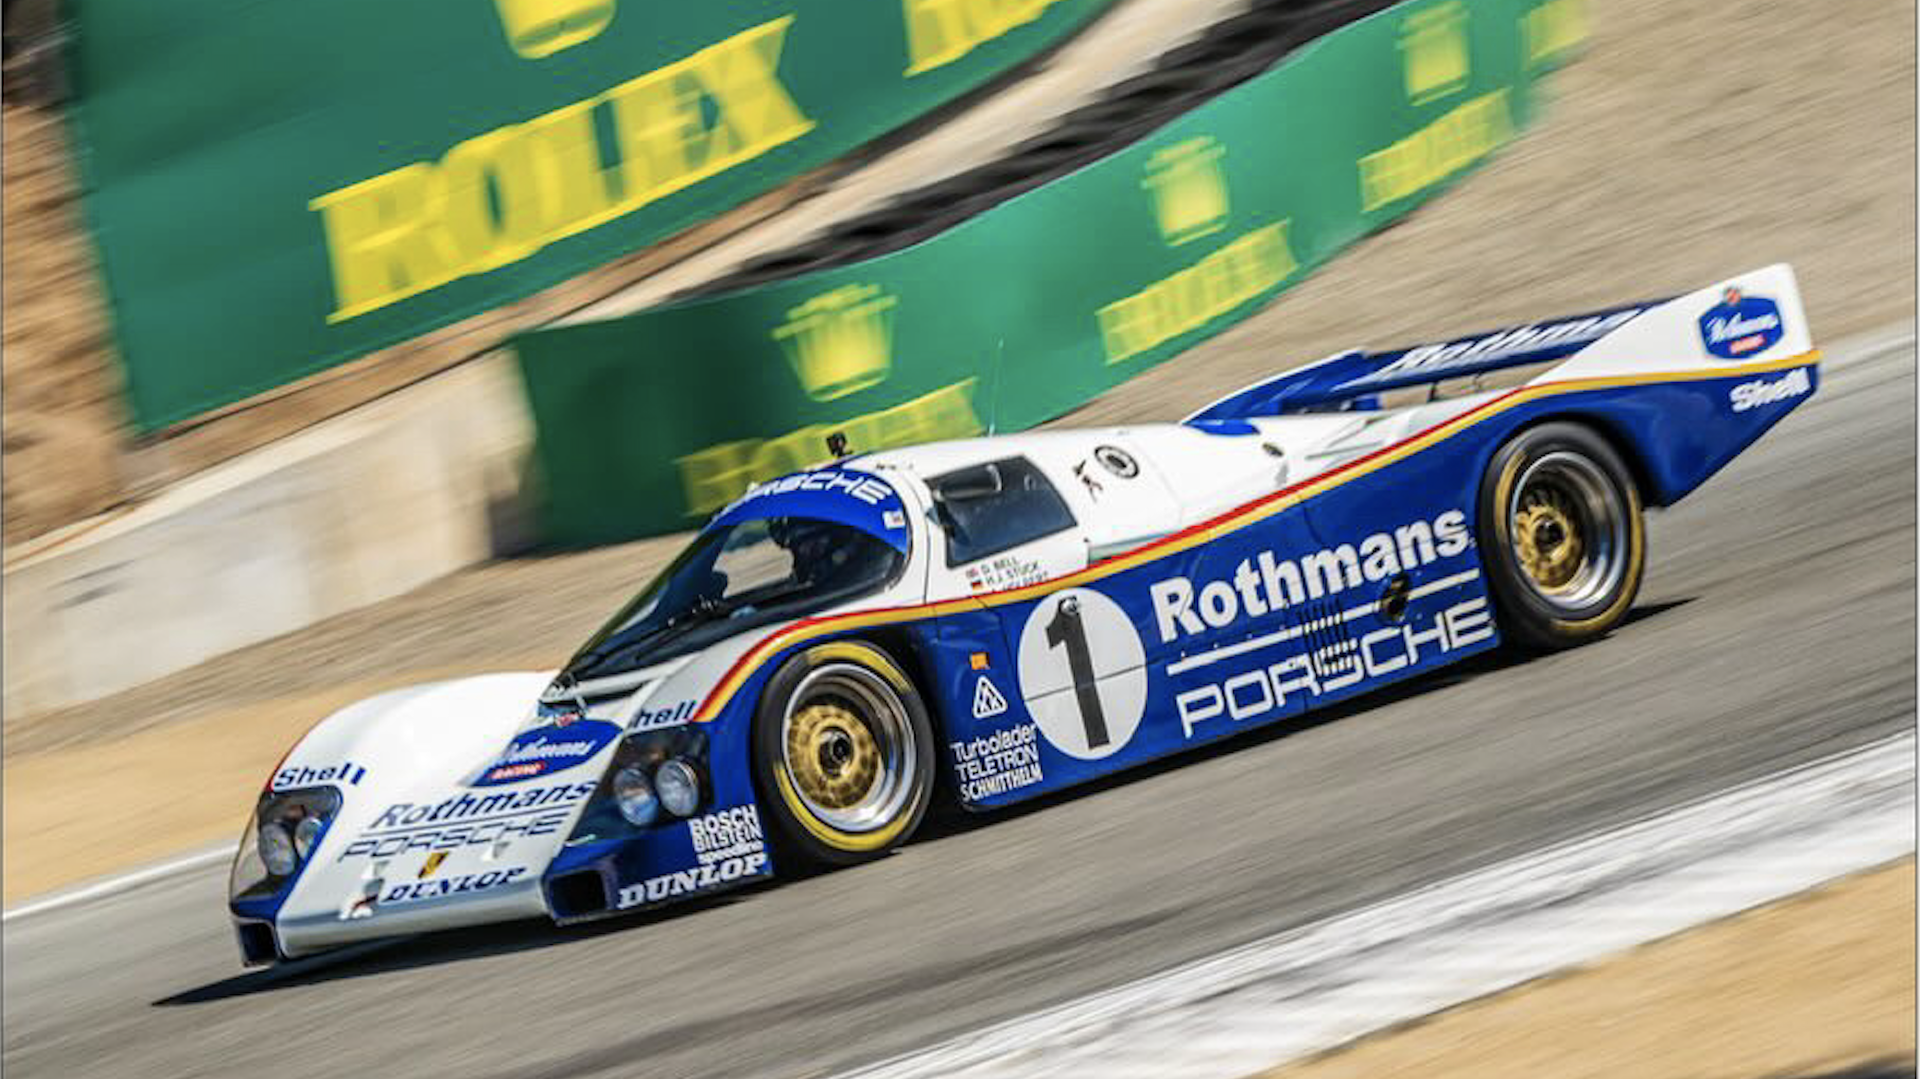 How To Prep A Vintage Le Mans Winning Porsche For Weekend Of Racing